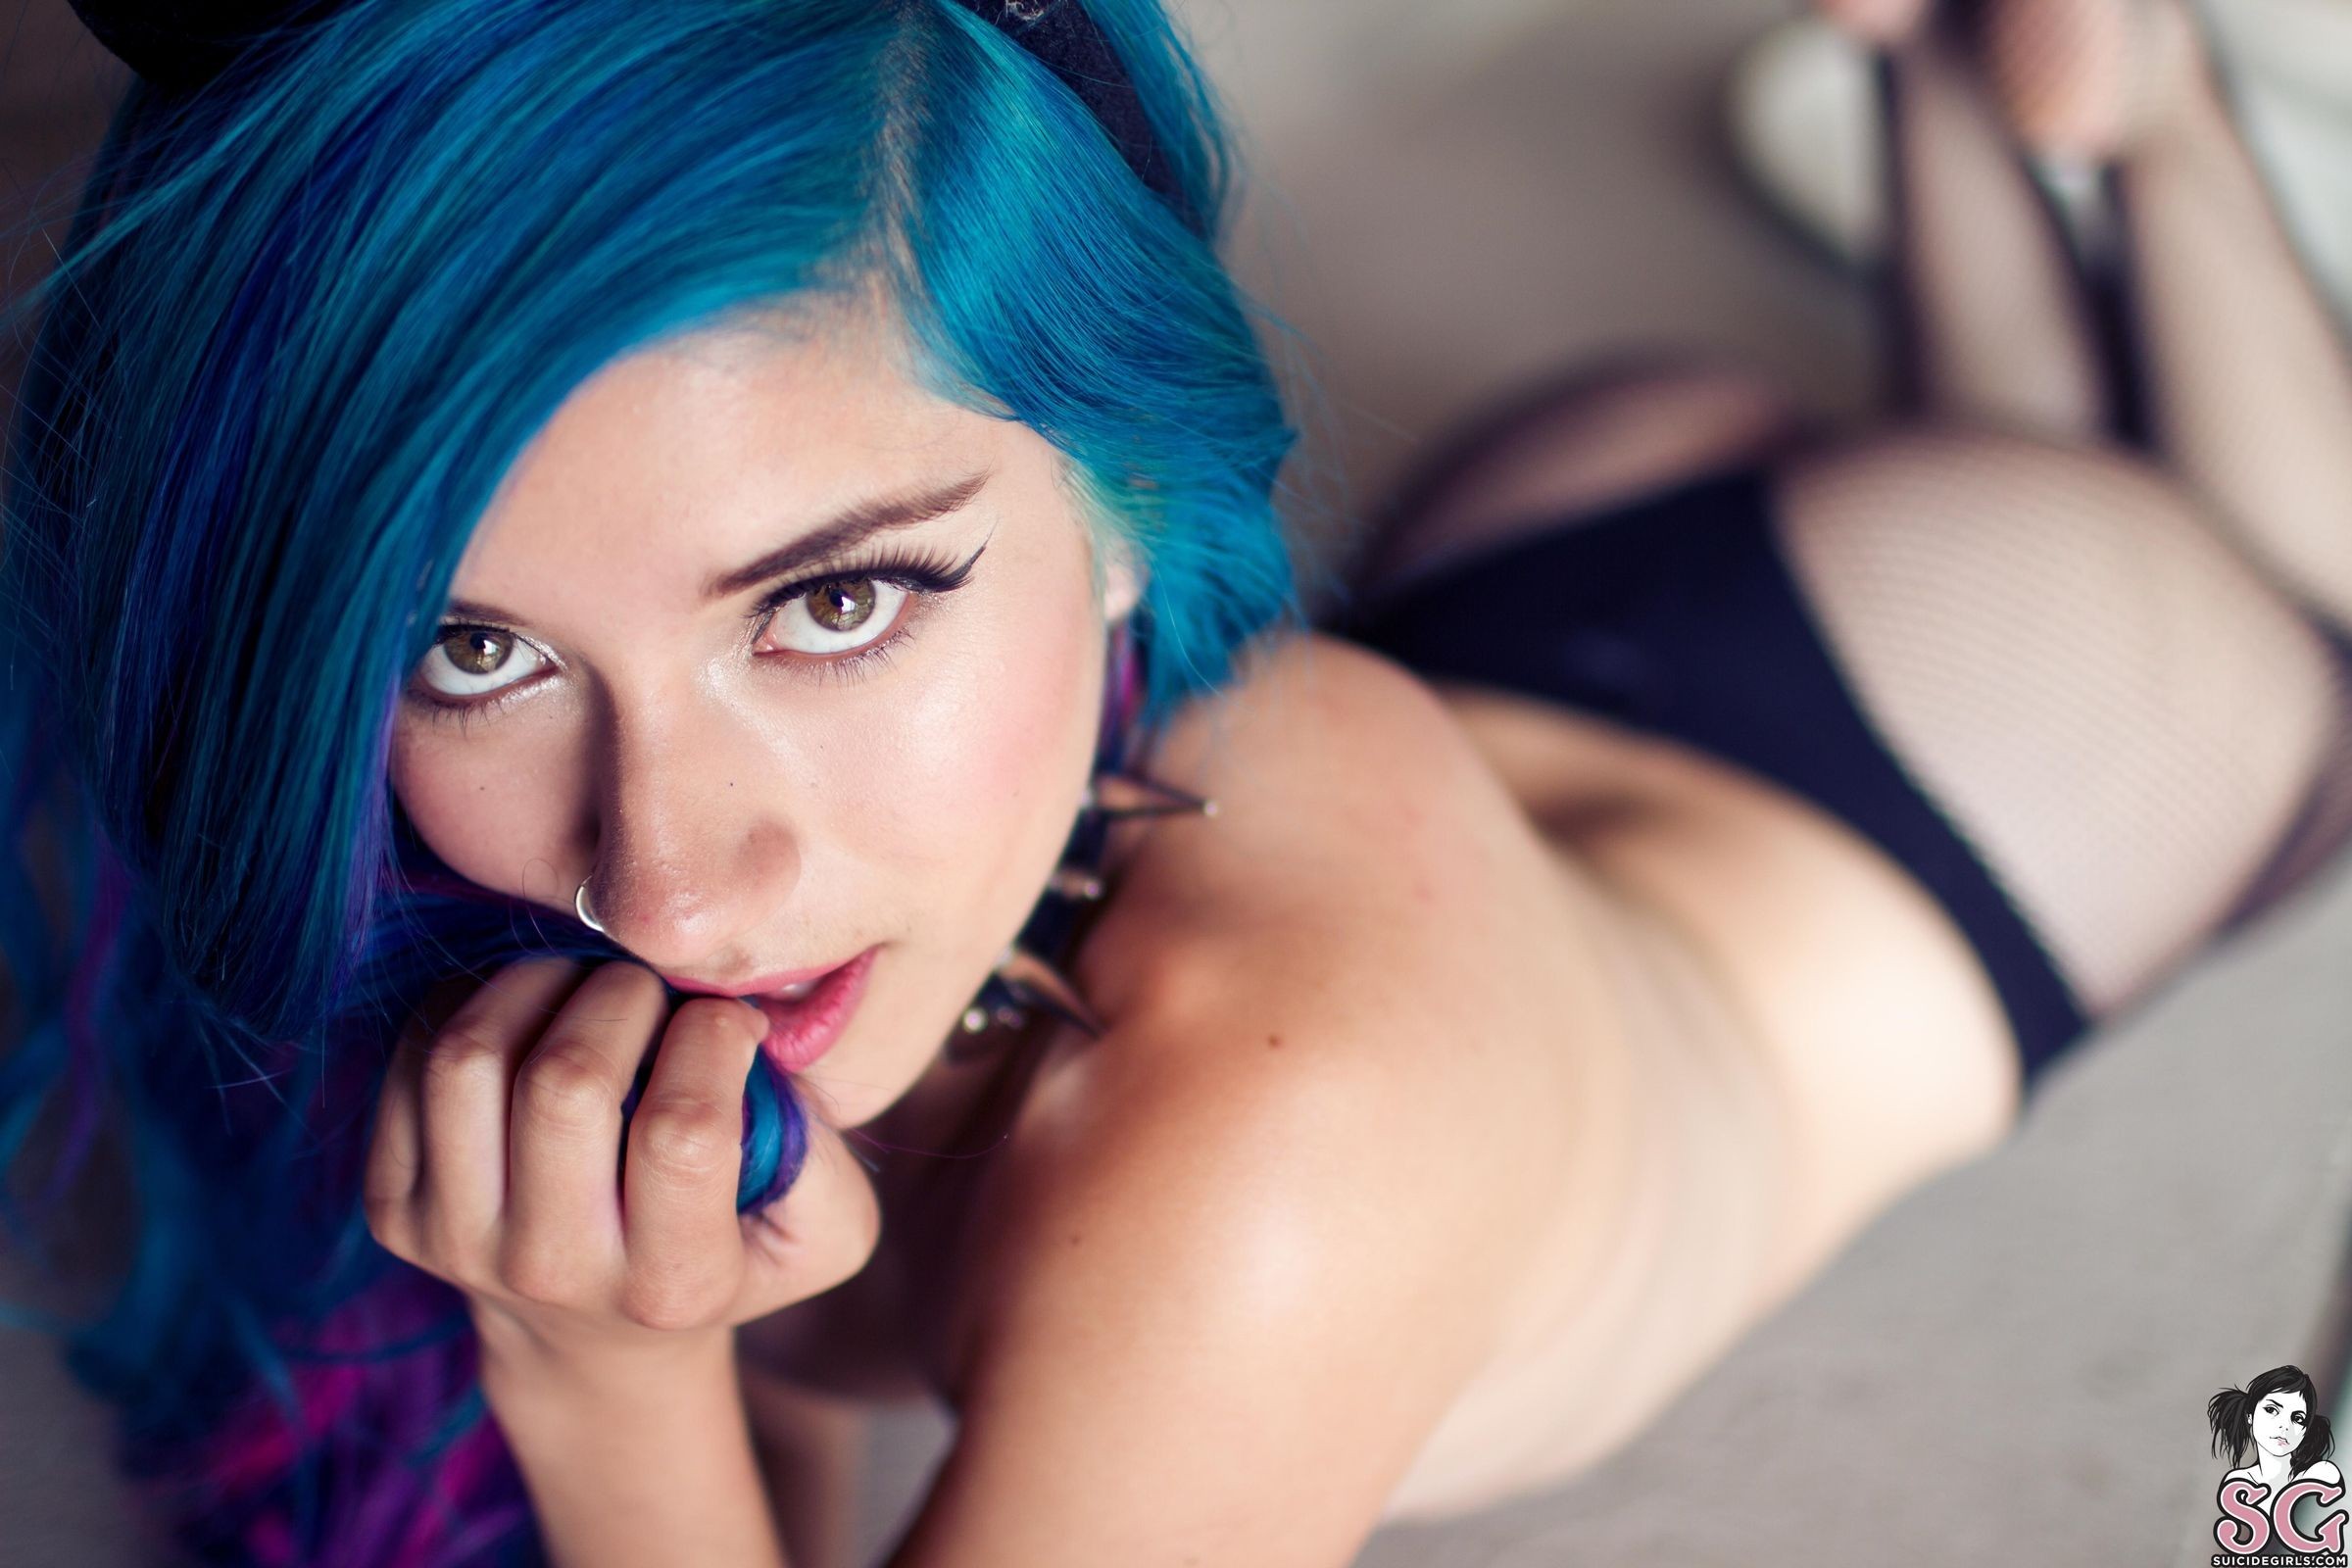 Beautiful Suicide GIrl Fay Come Here, Kitty (18) HD high quality lossless i...